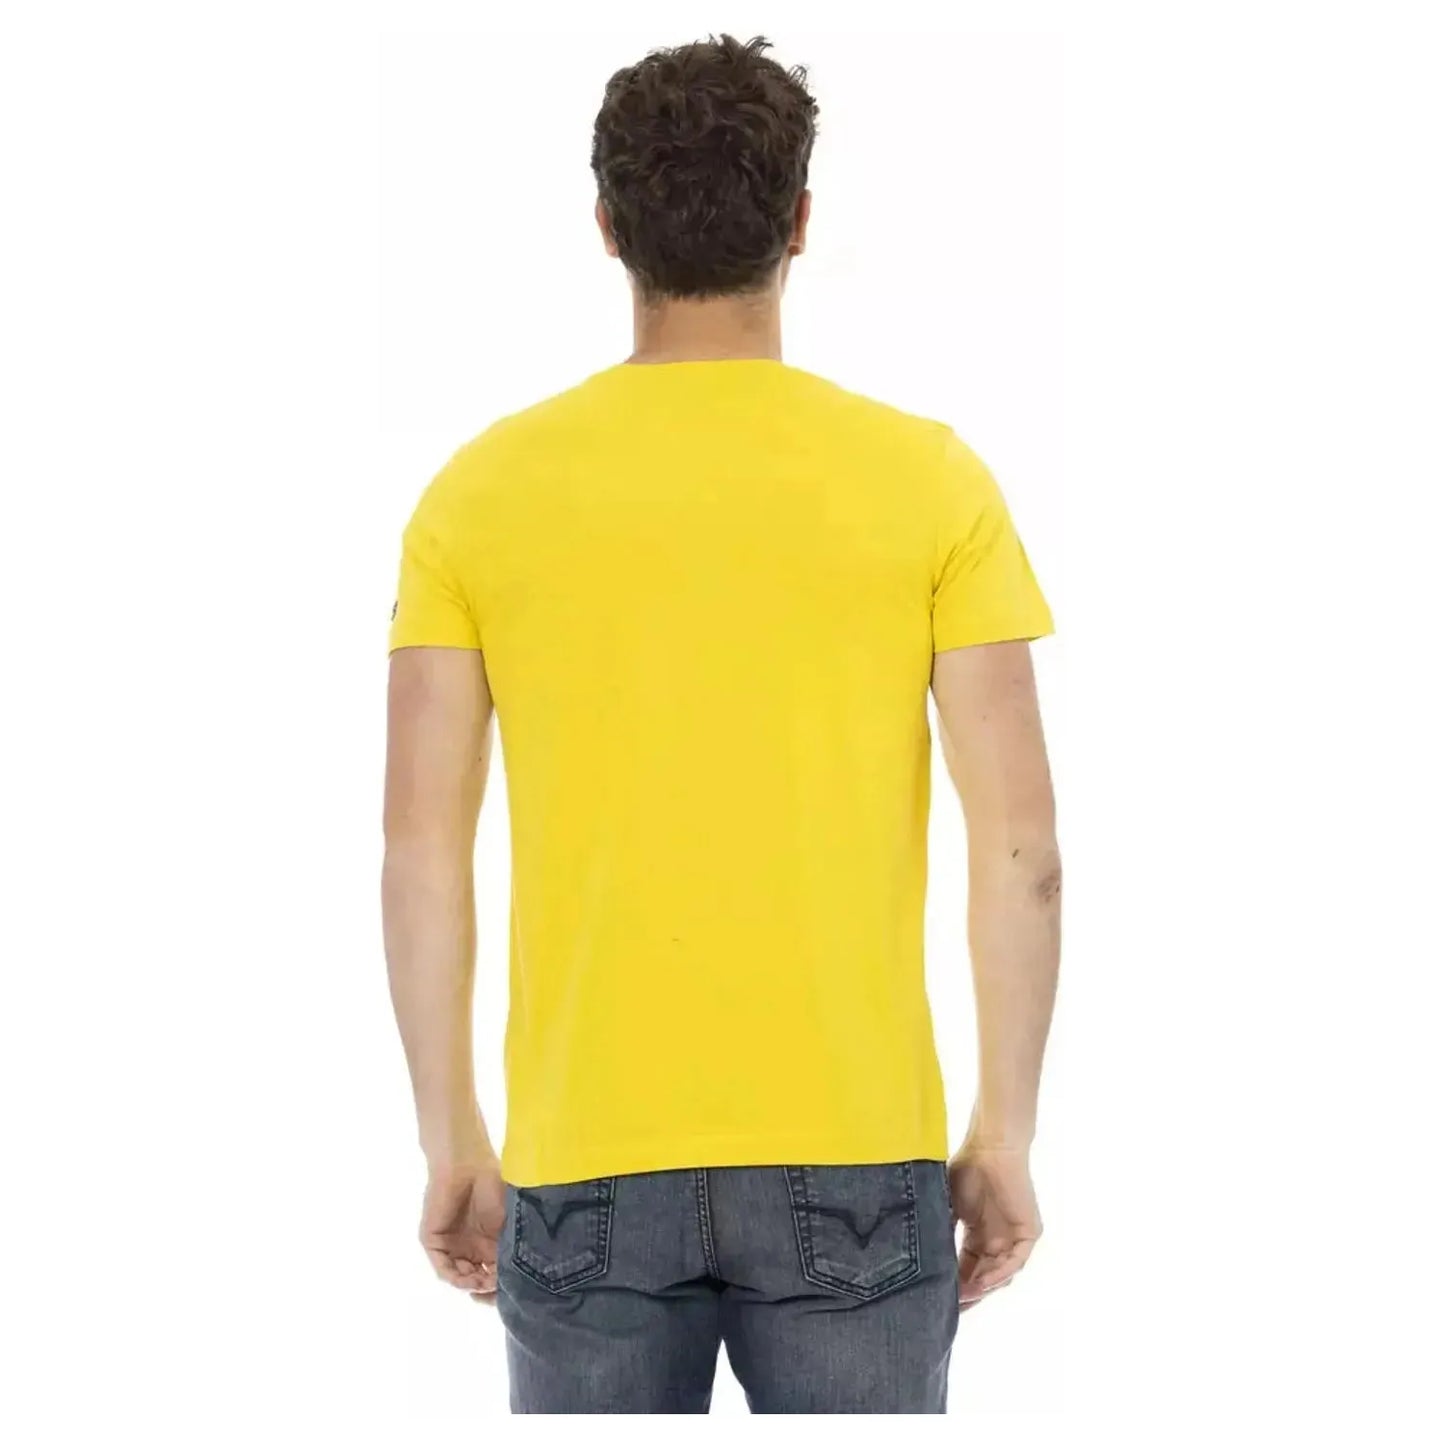 Trussardi Action Sunny Day Casual Chic Cotton Tee yellow-cotton-t-shirt-9 product-22717-1762641282-21-f73b5e35-02e.webp